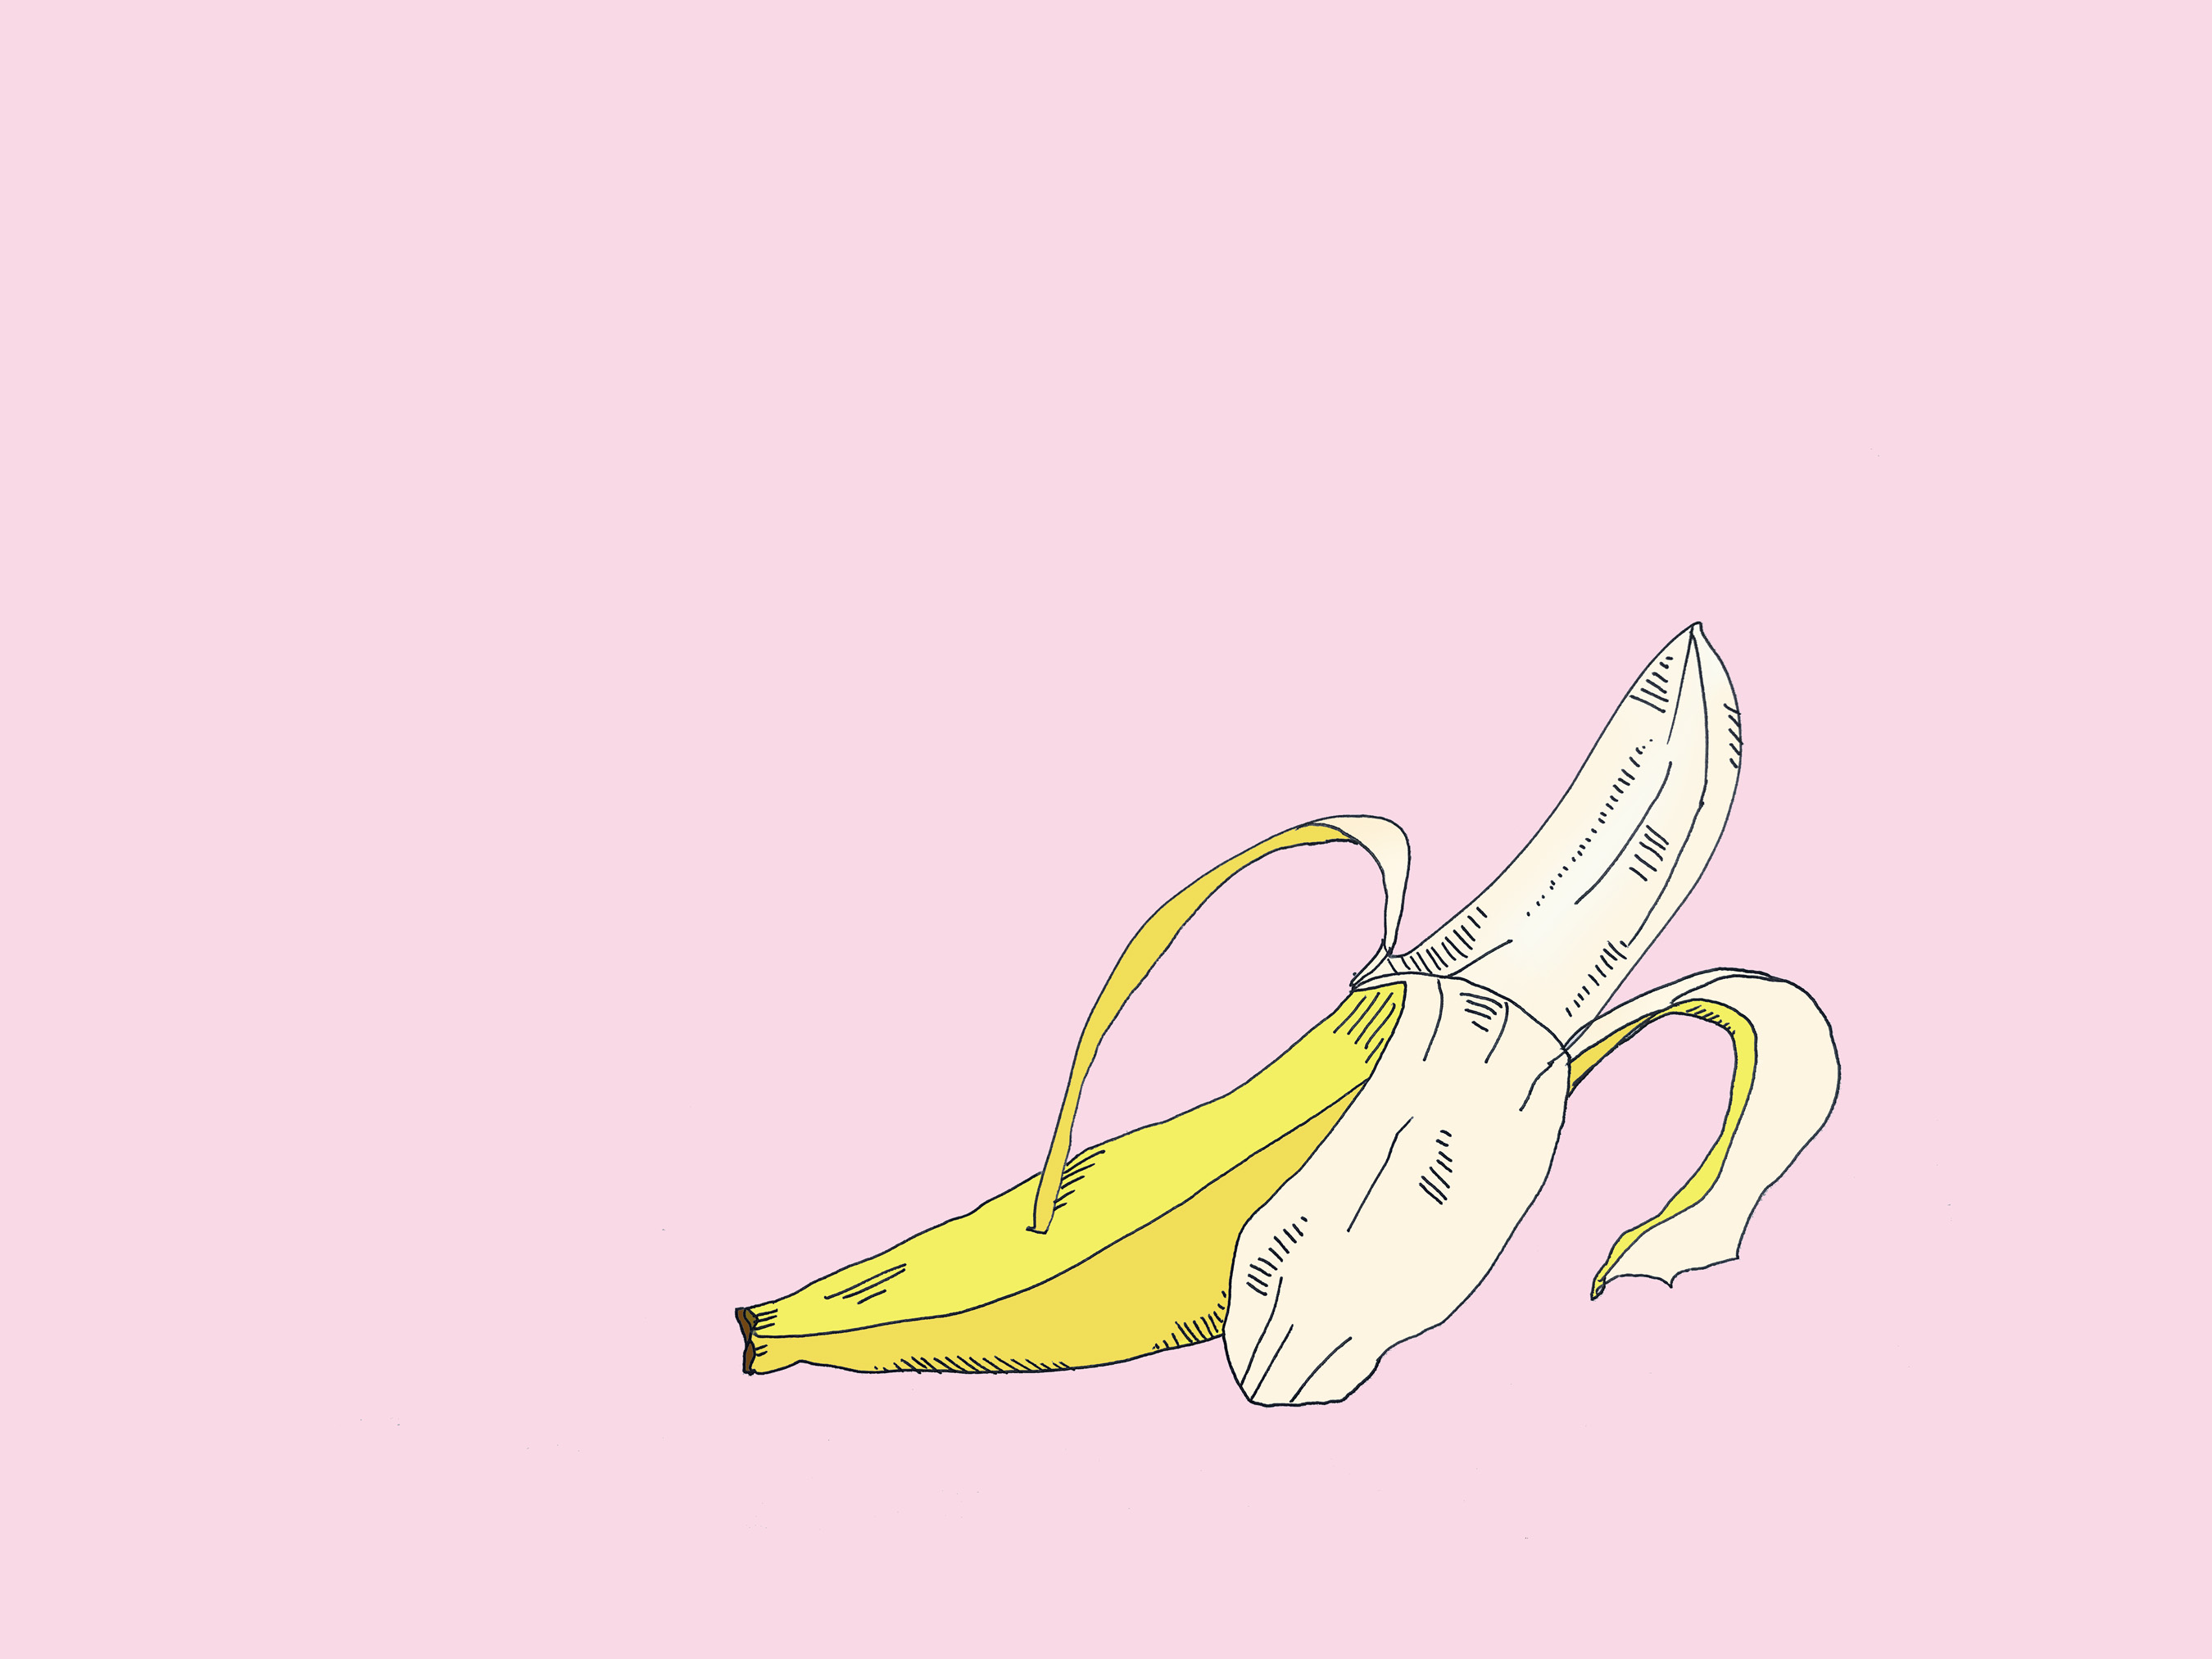 art every day number 334 / illustration / banana